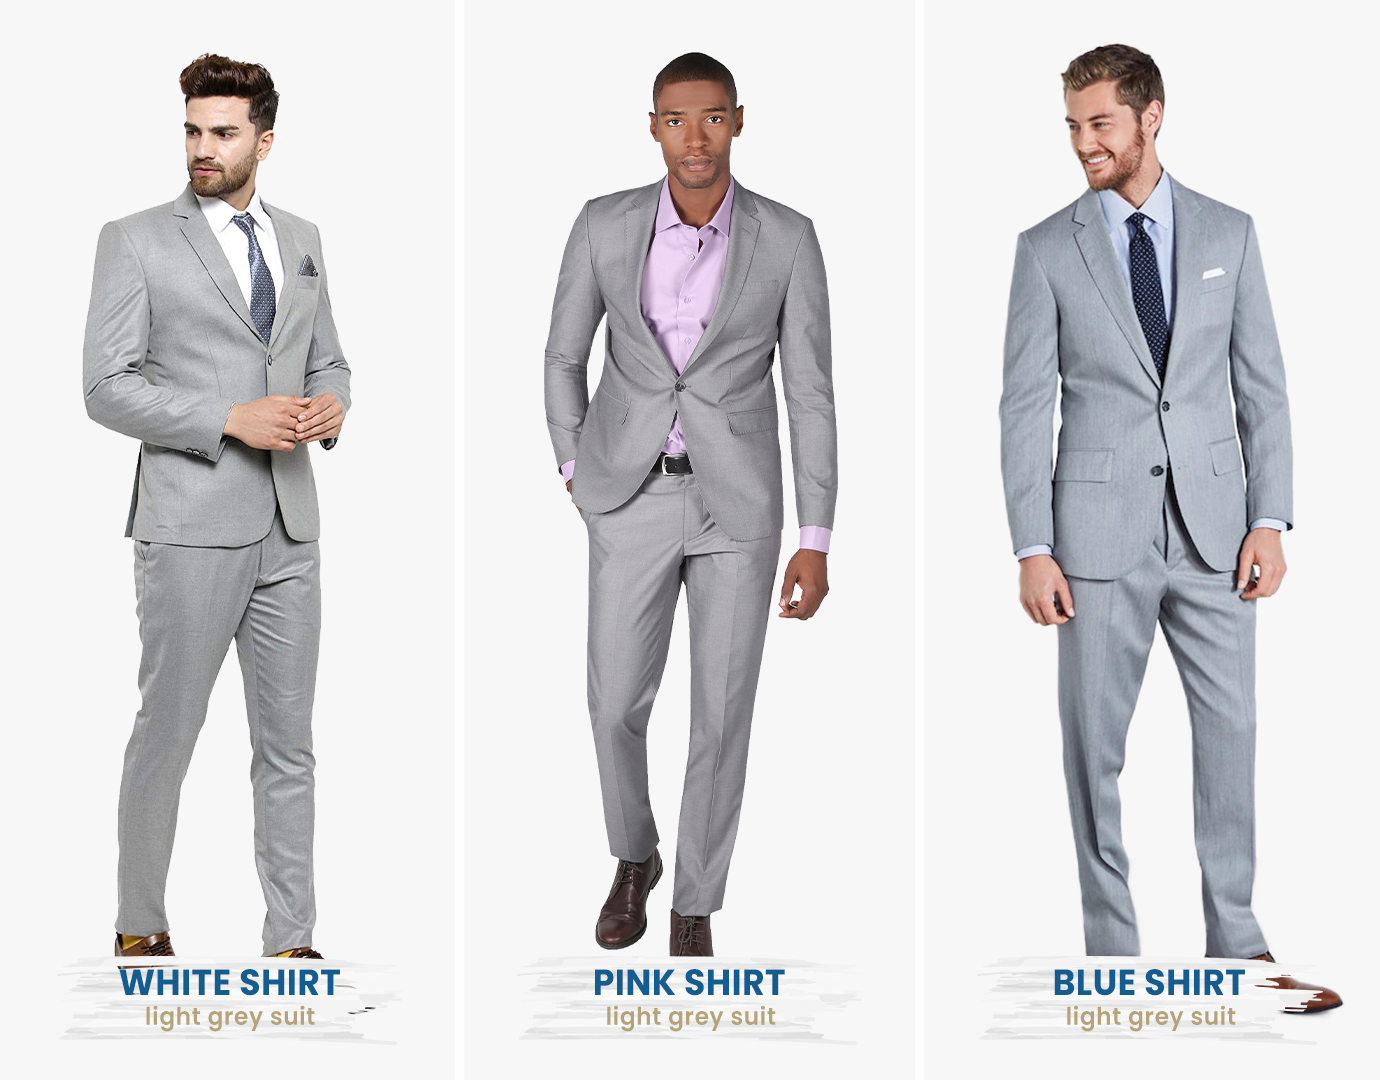 Light grey suit color combinations with different shirt colors